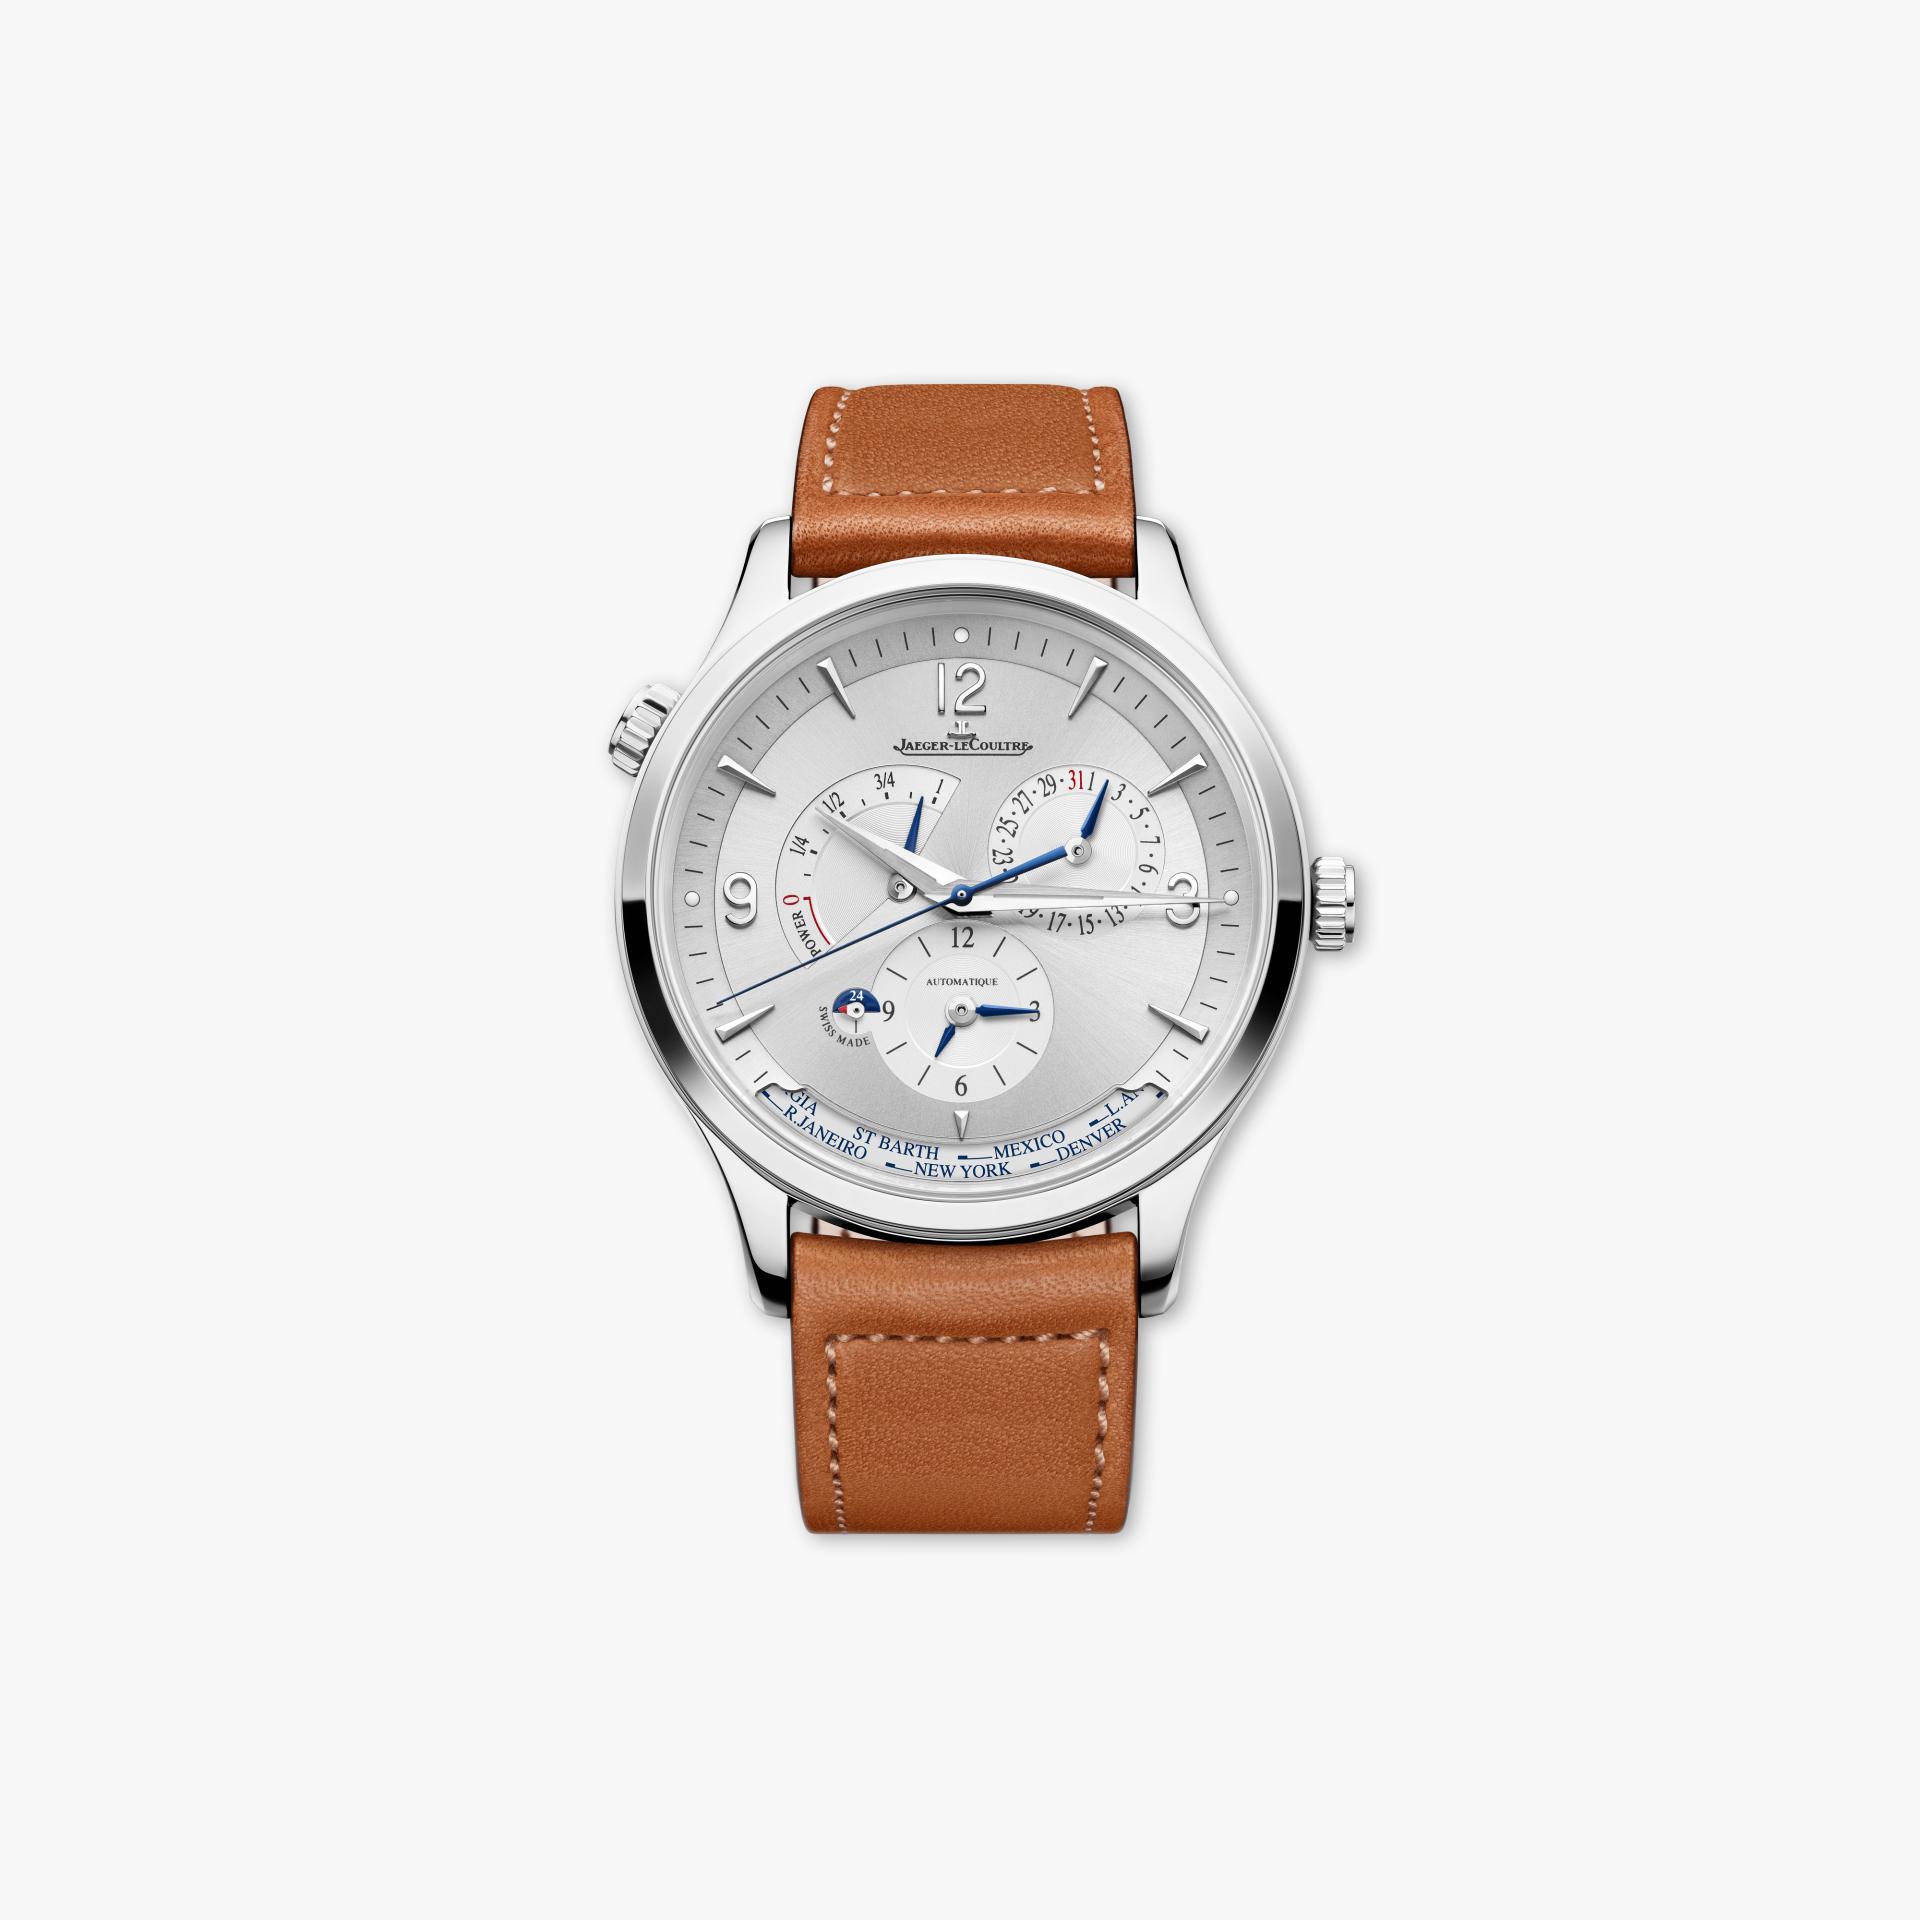 images/richmont-international--28jlc-29/jaeger-lecoultre/master/master-control/master-control-geographic/q4128420/q4128420_maison-de-greef_jaeger-lecoultre_watches_front.jpg